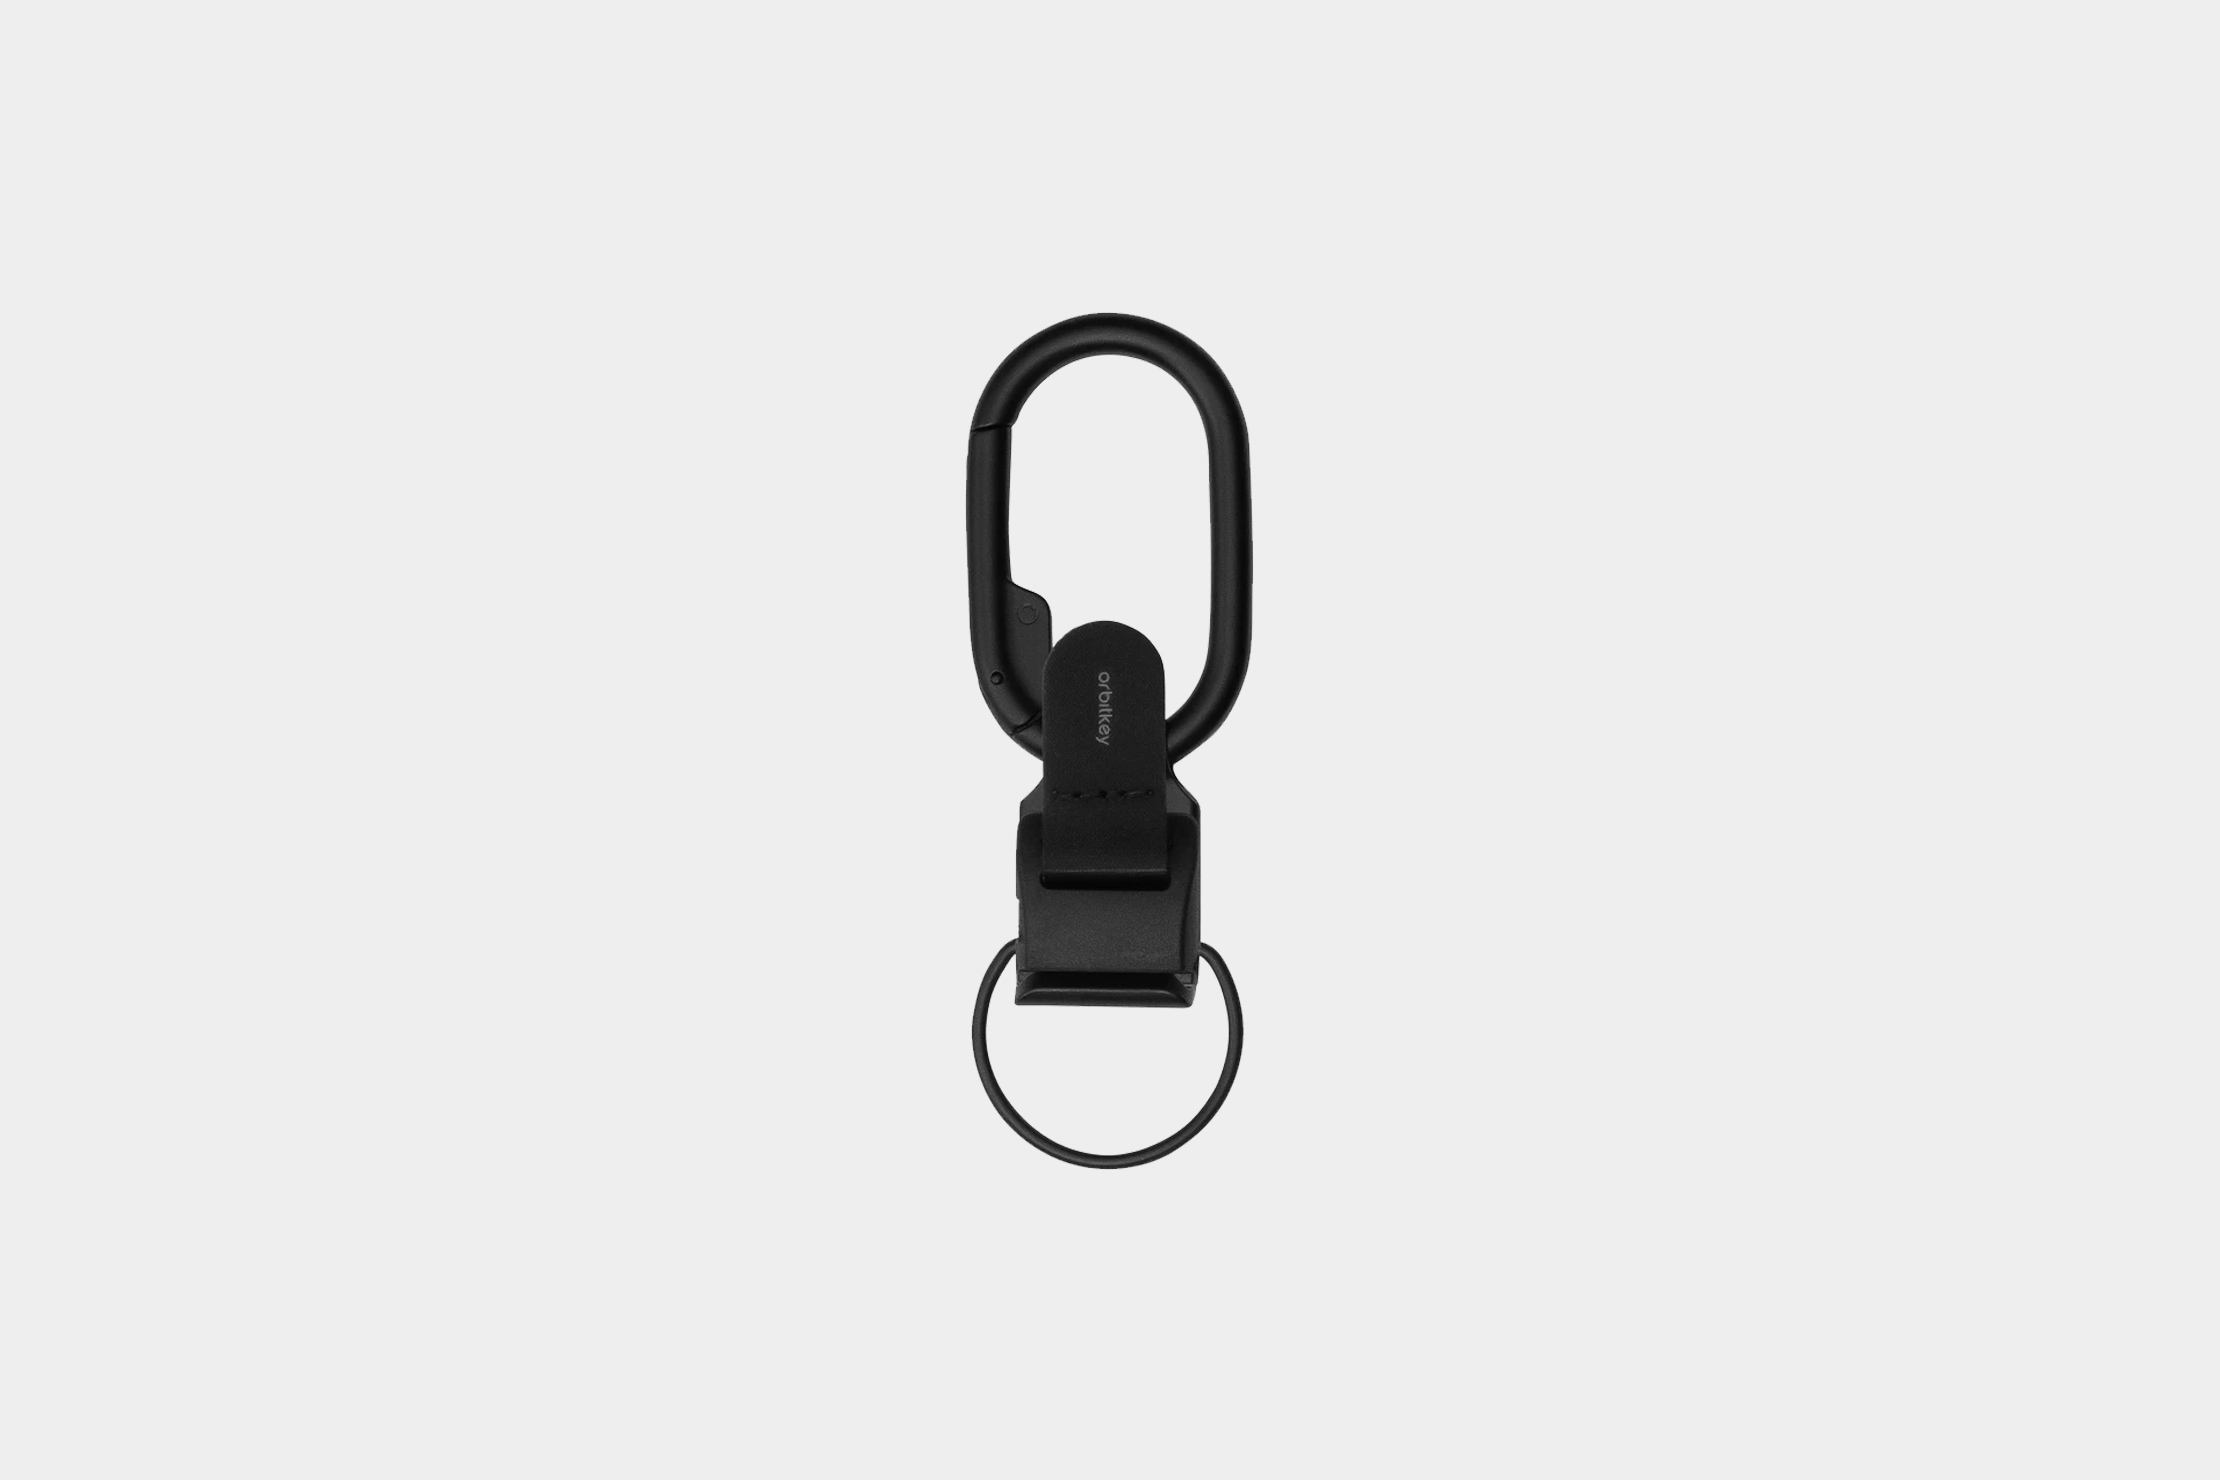 Orbitkey Quick Release Key Ring V2 review - The best simple keyring yet? -  The Gadgeteer